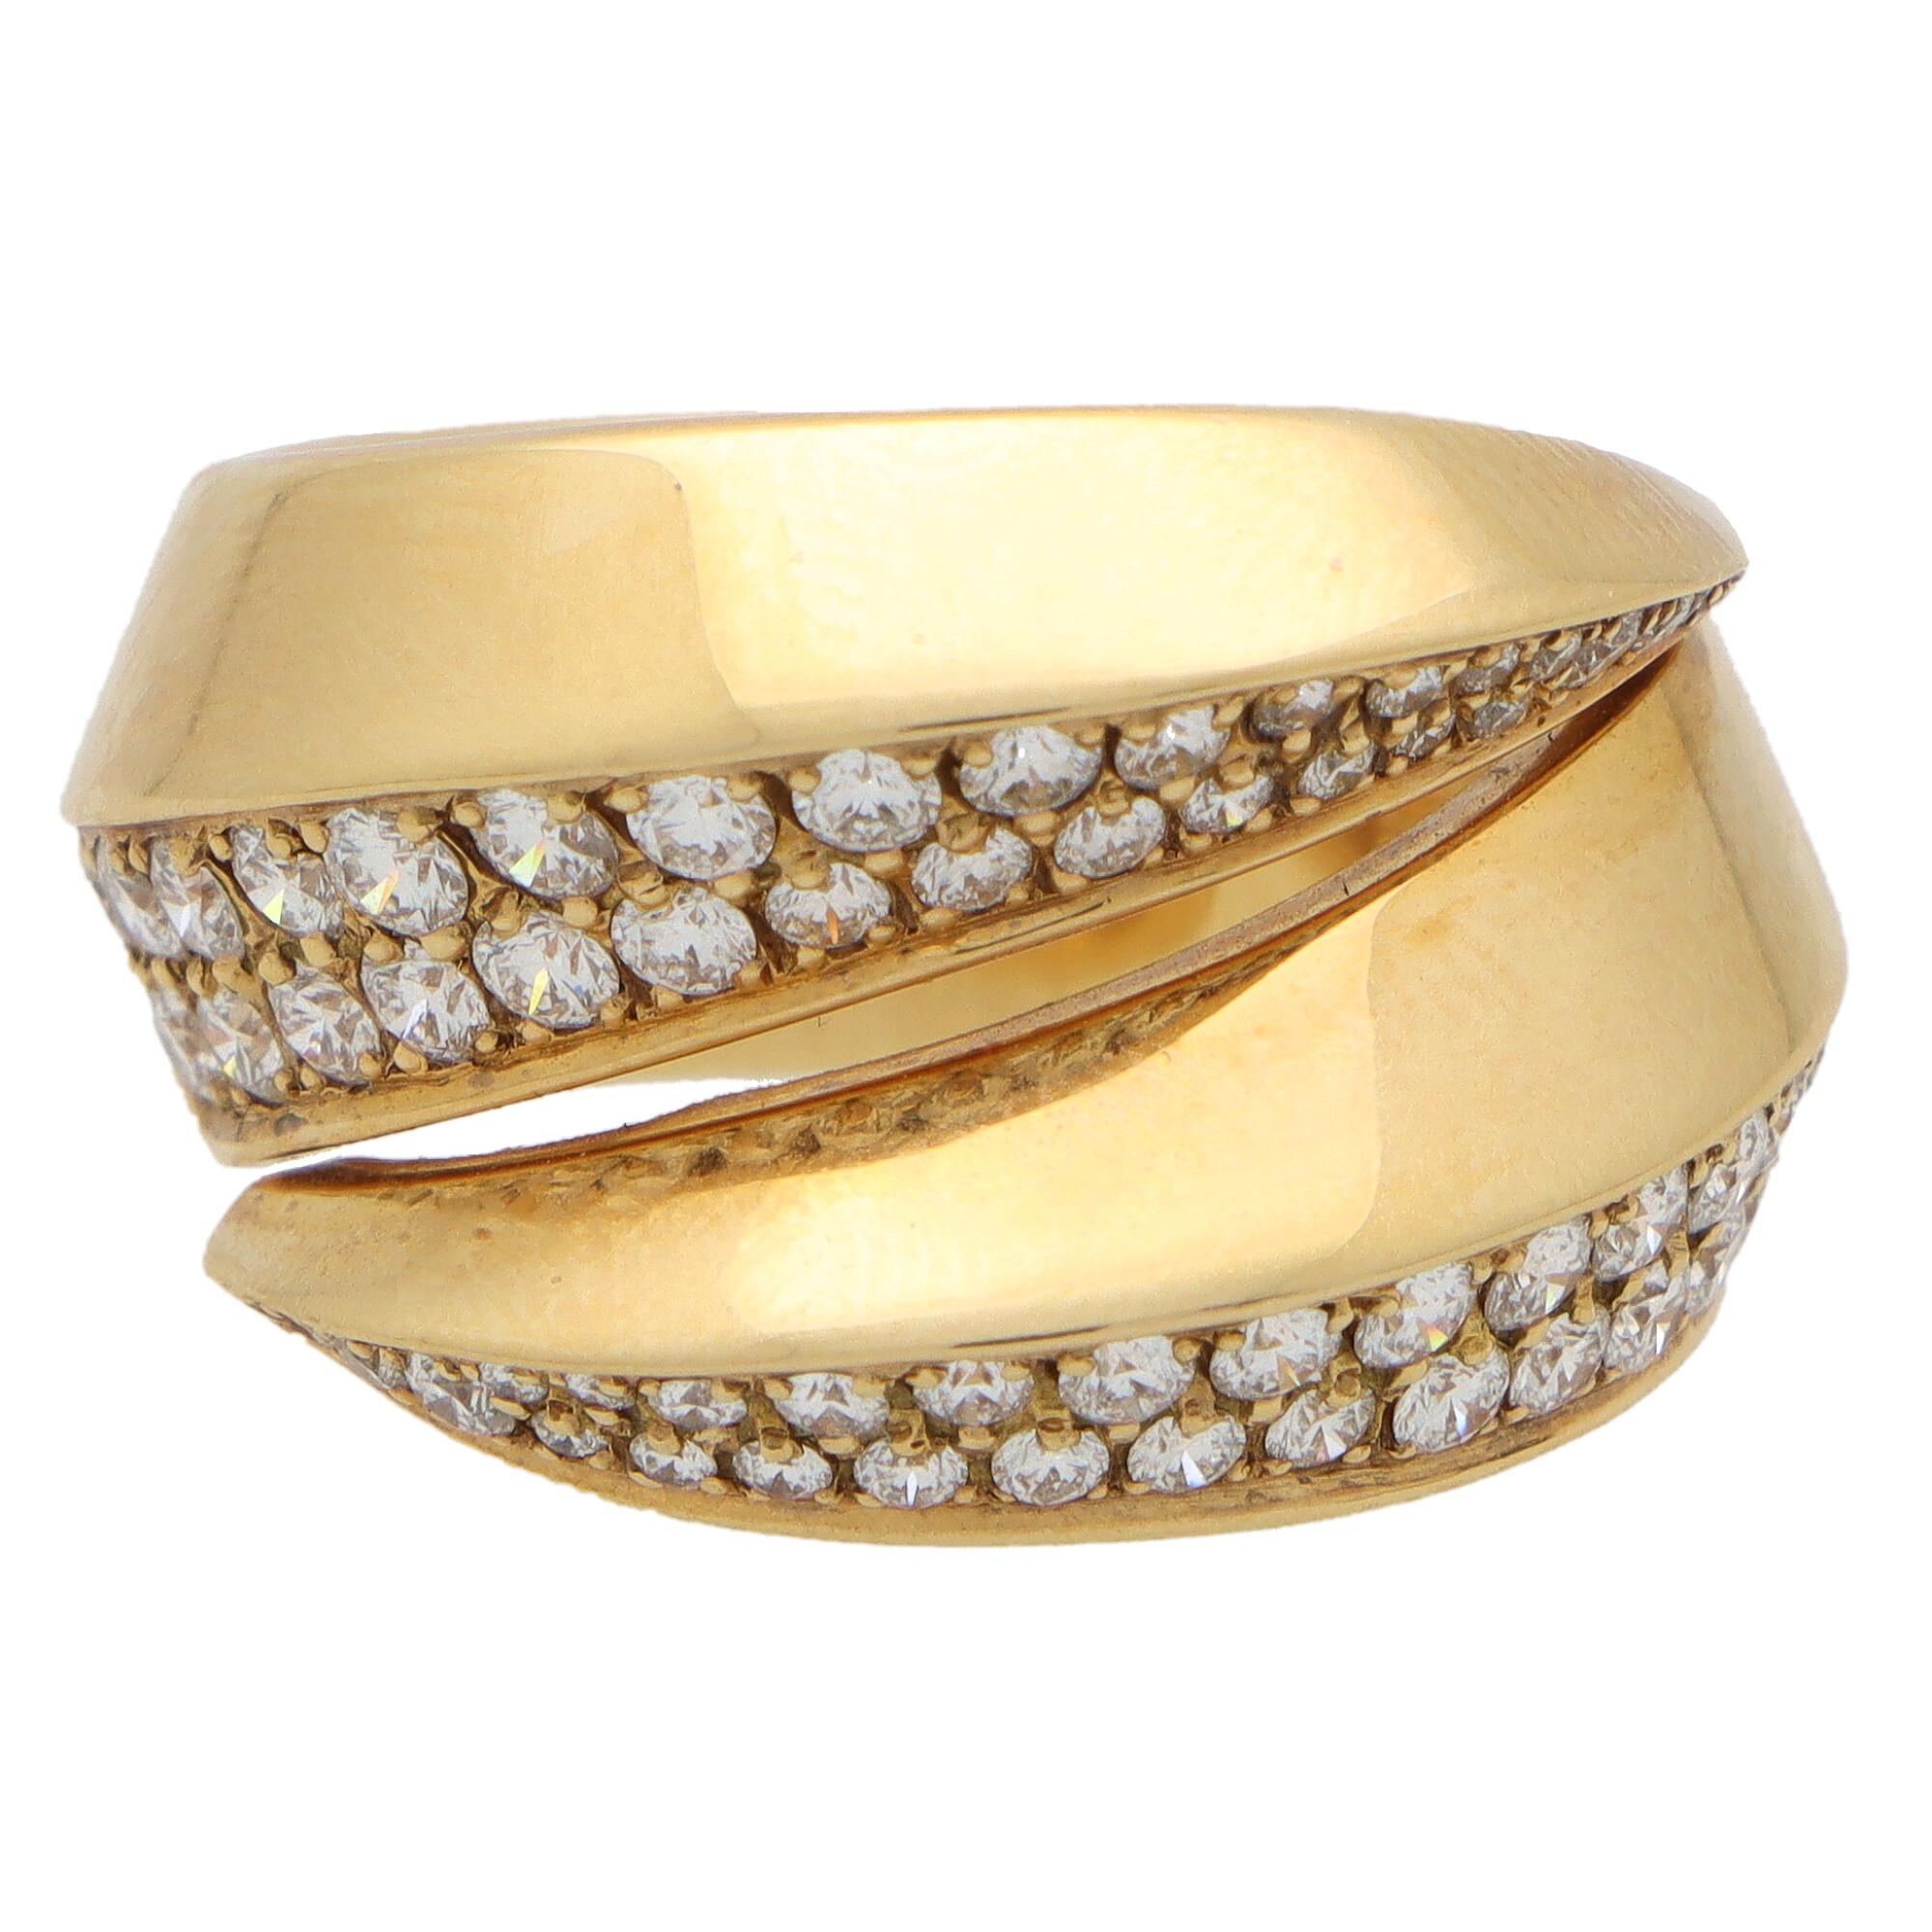 Vintage Cartier ‘Panthère Griffe’ Diamond Ring in 19k Yellow Gold